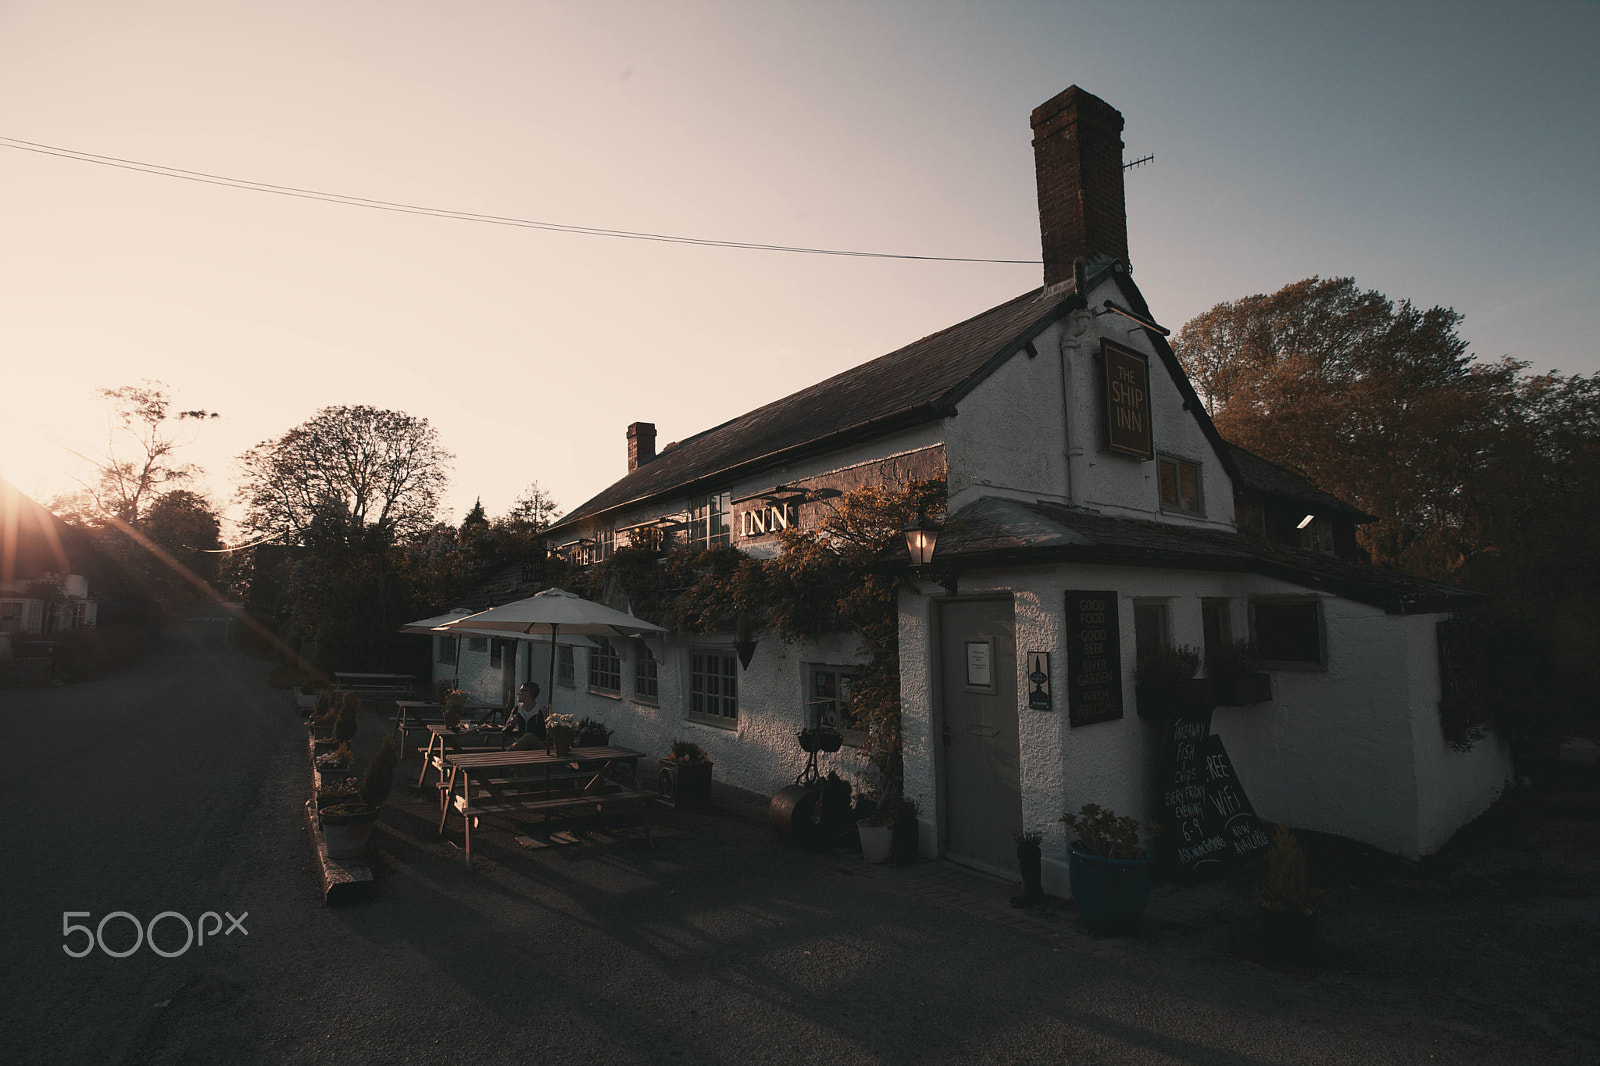 16.0 - 35.0 mm sample photo. Small inn down the road photography